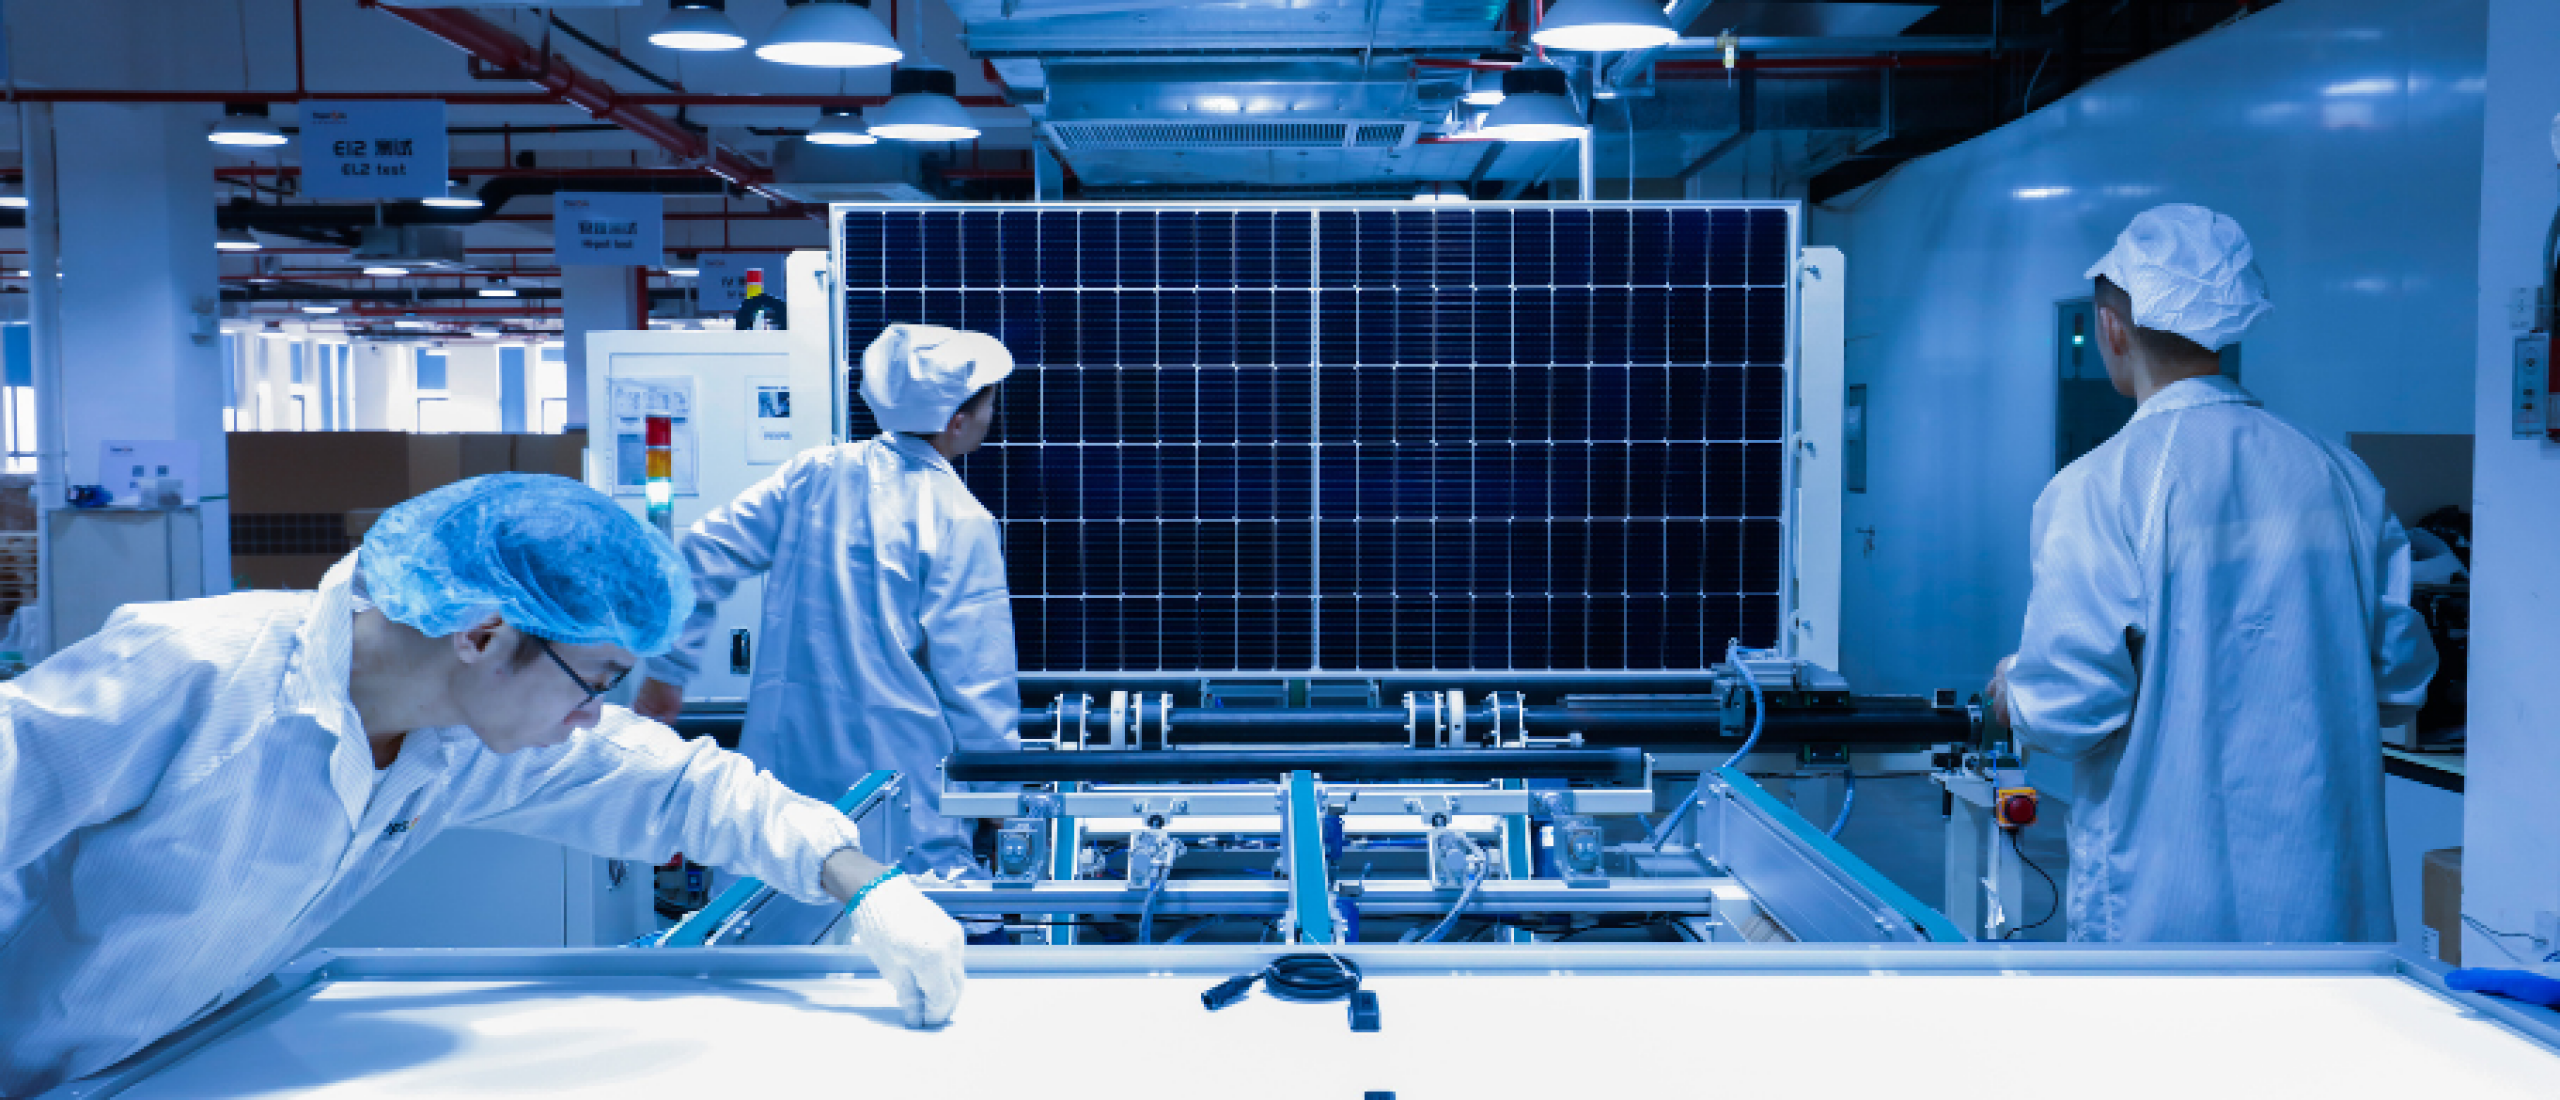 Should The Sky Be The (Acceptable Quality) Limit? A Comprehensive ISO 2859 Explanation for Solar PV Module Quality Inspection